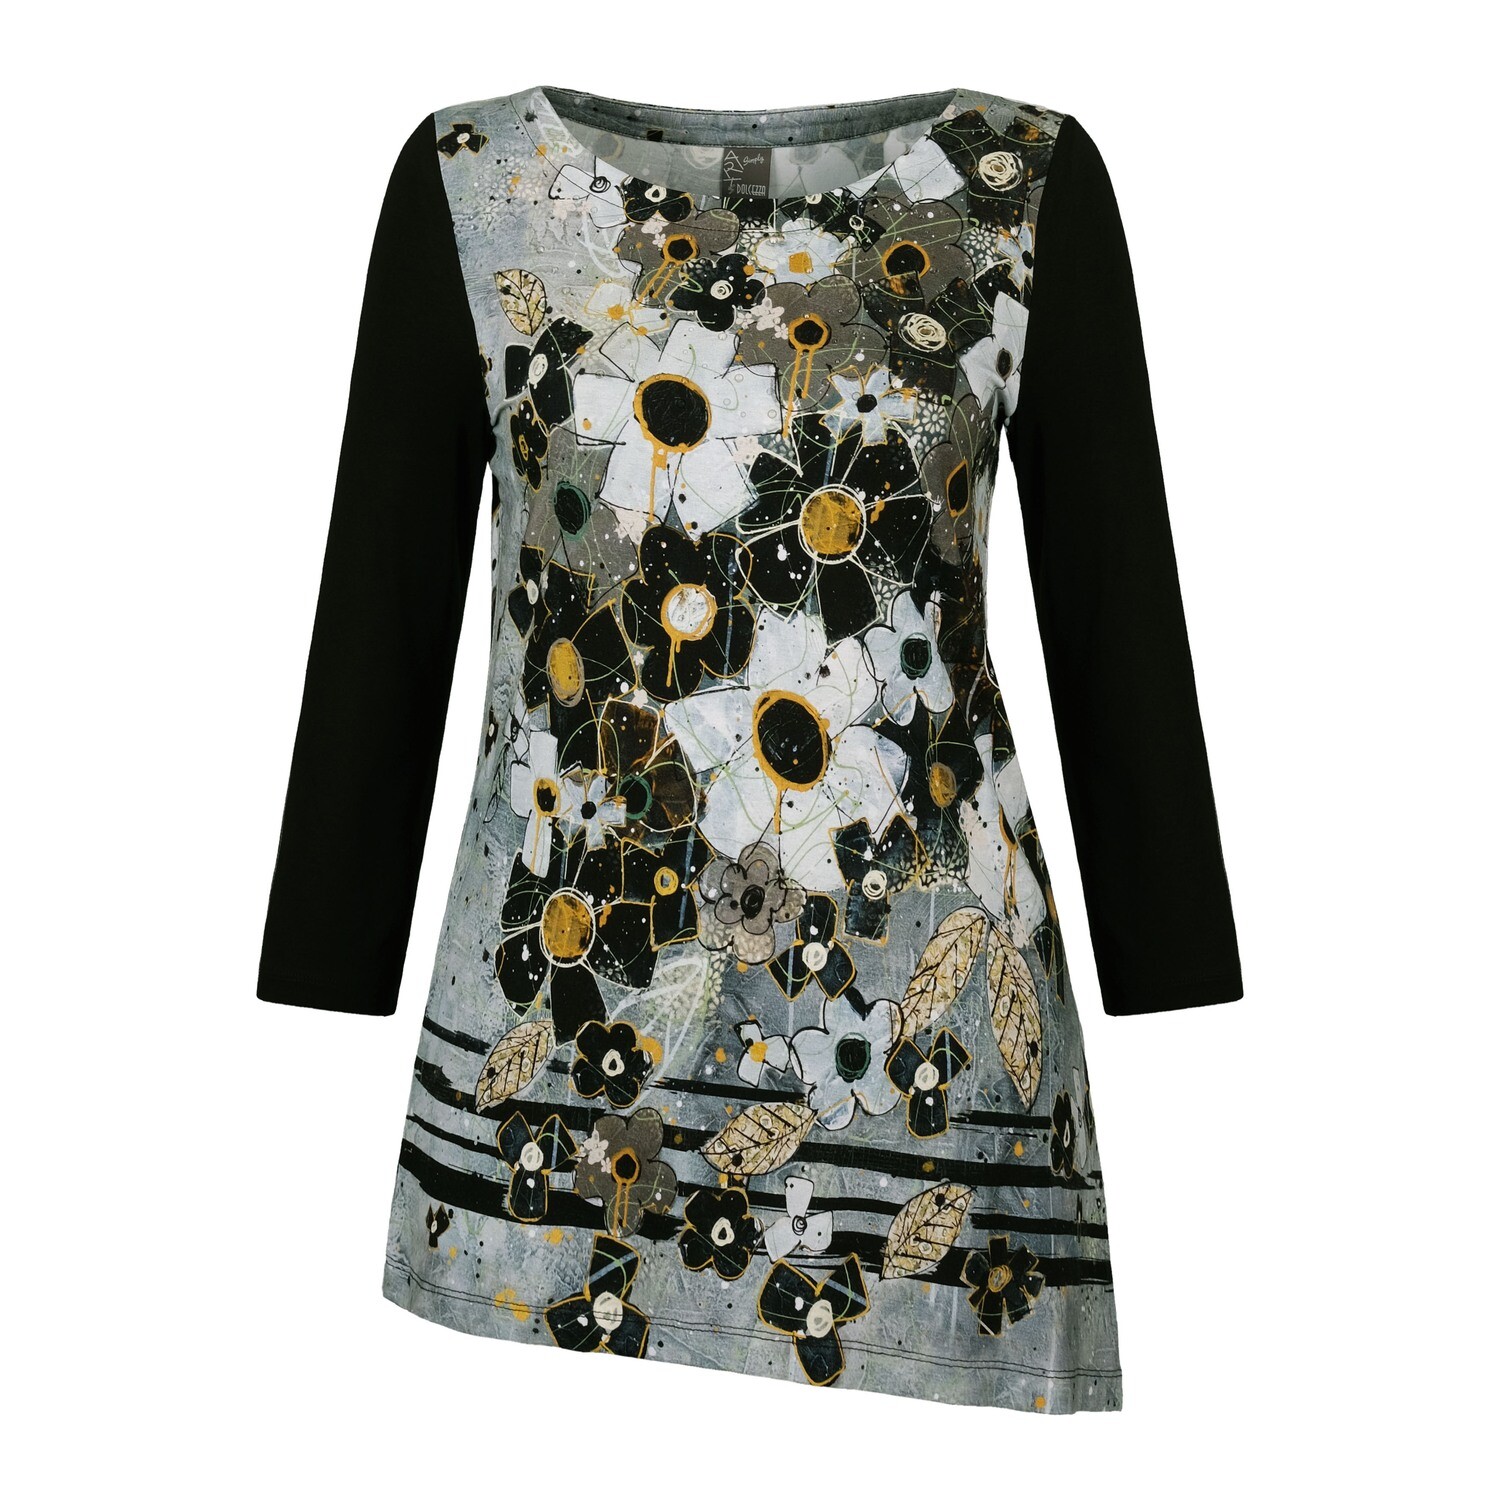 Simply Art Dolcezza: I Am Taking You Home Tonight Abstract Art Asymmetrical Tunic SOLD OUT